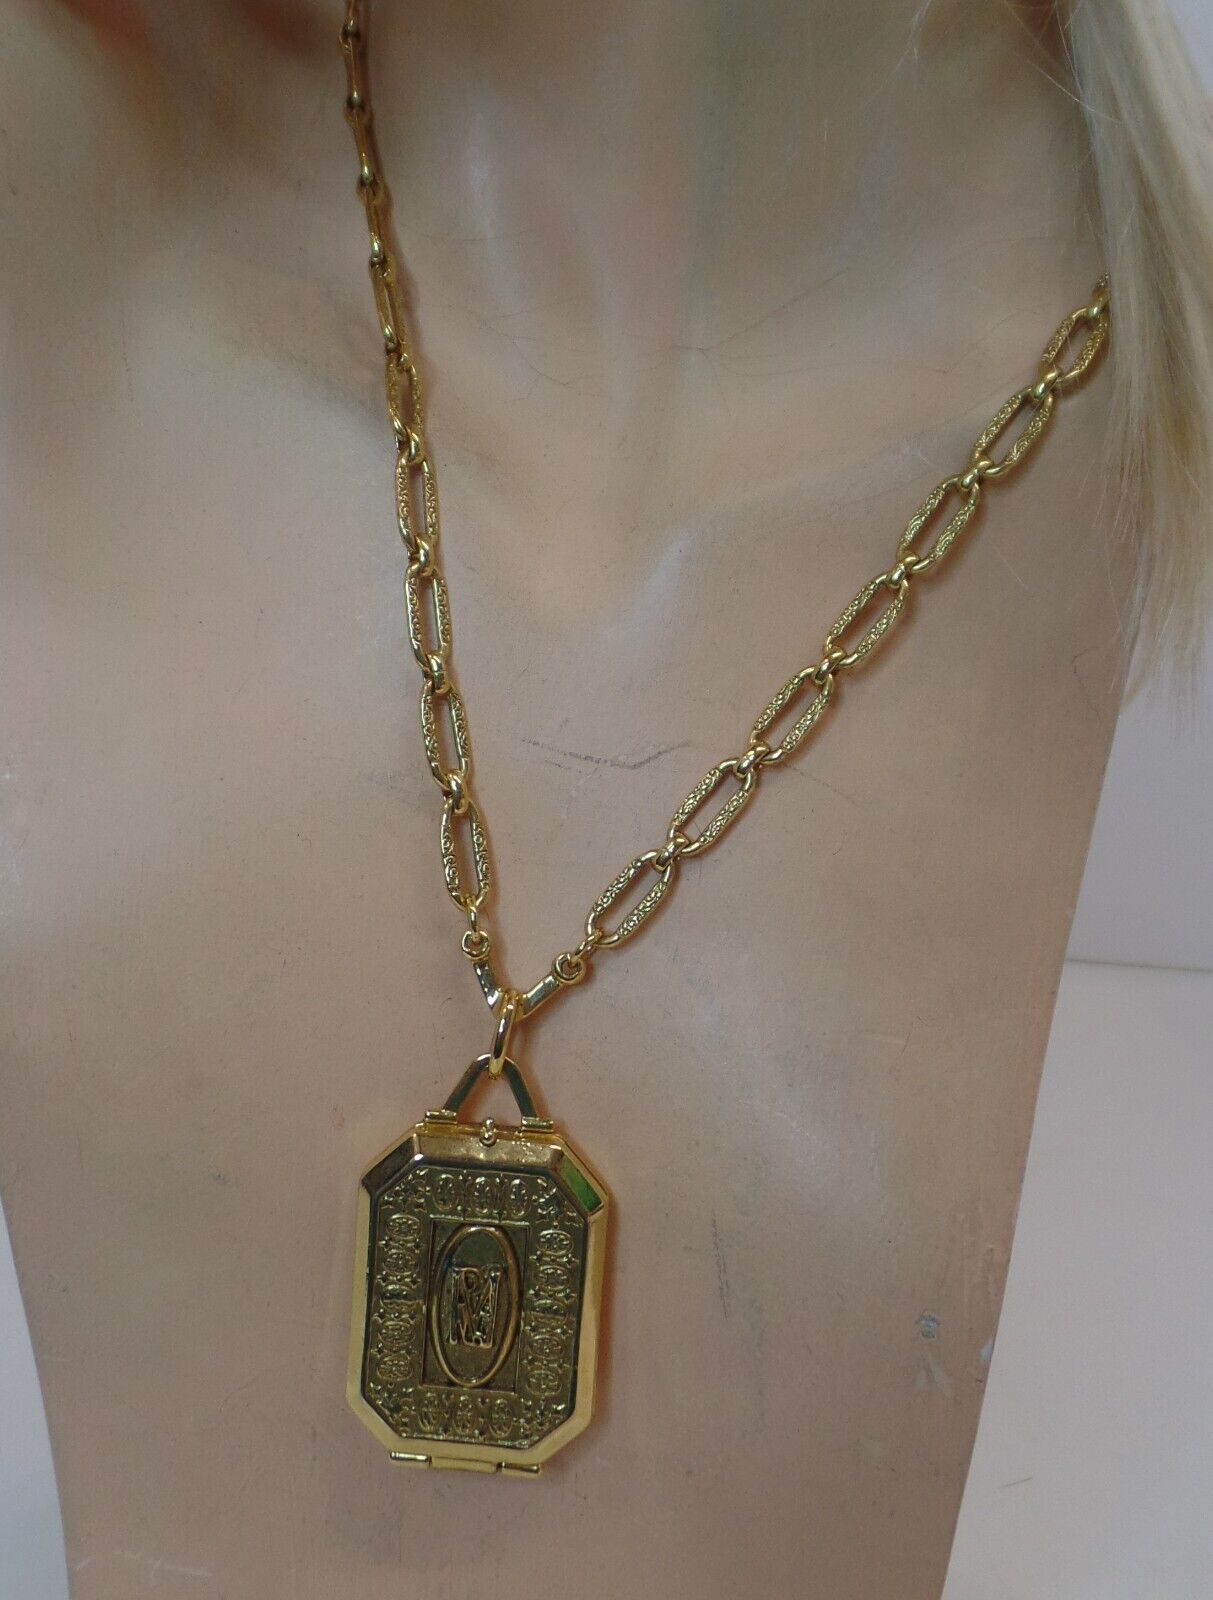 Antiquities Couture NWT Goldtone Maria Antoinette Square Locket Adj to 30" - $54.45